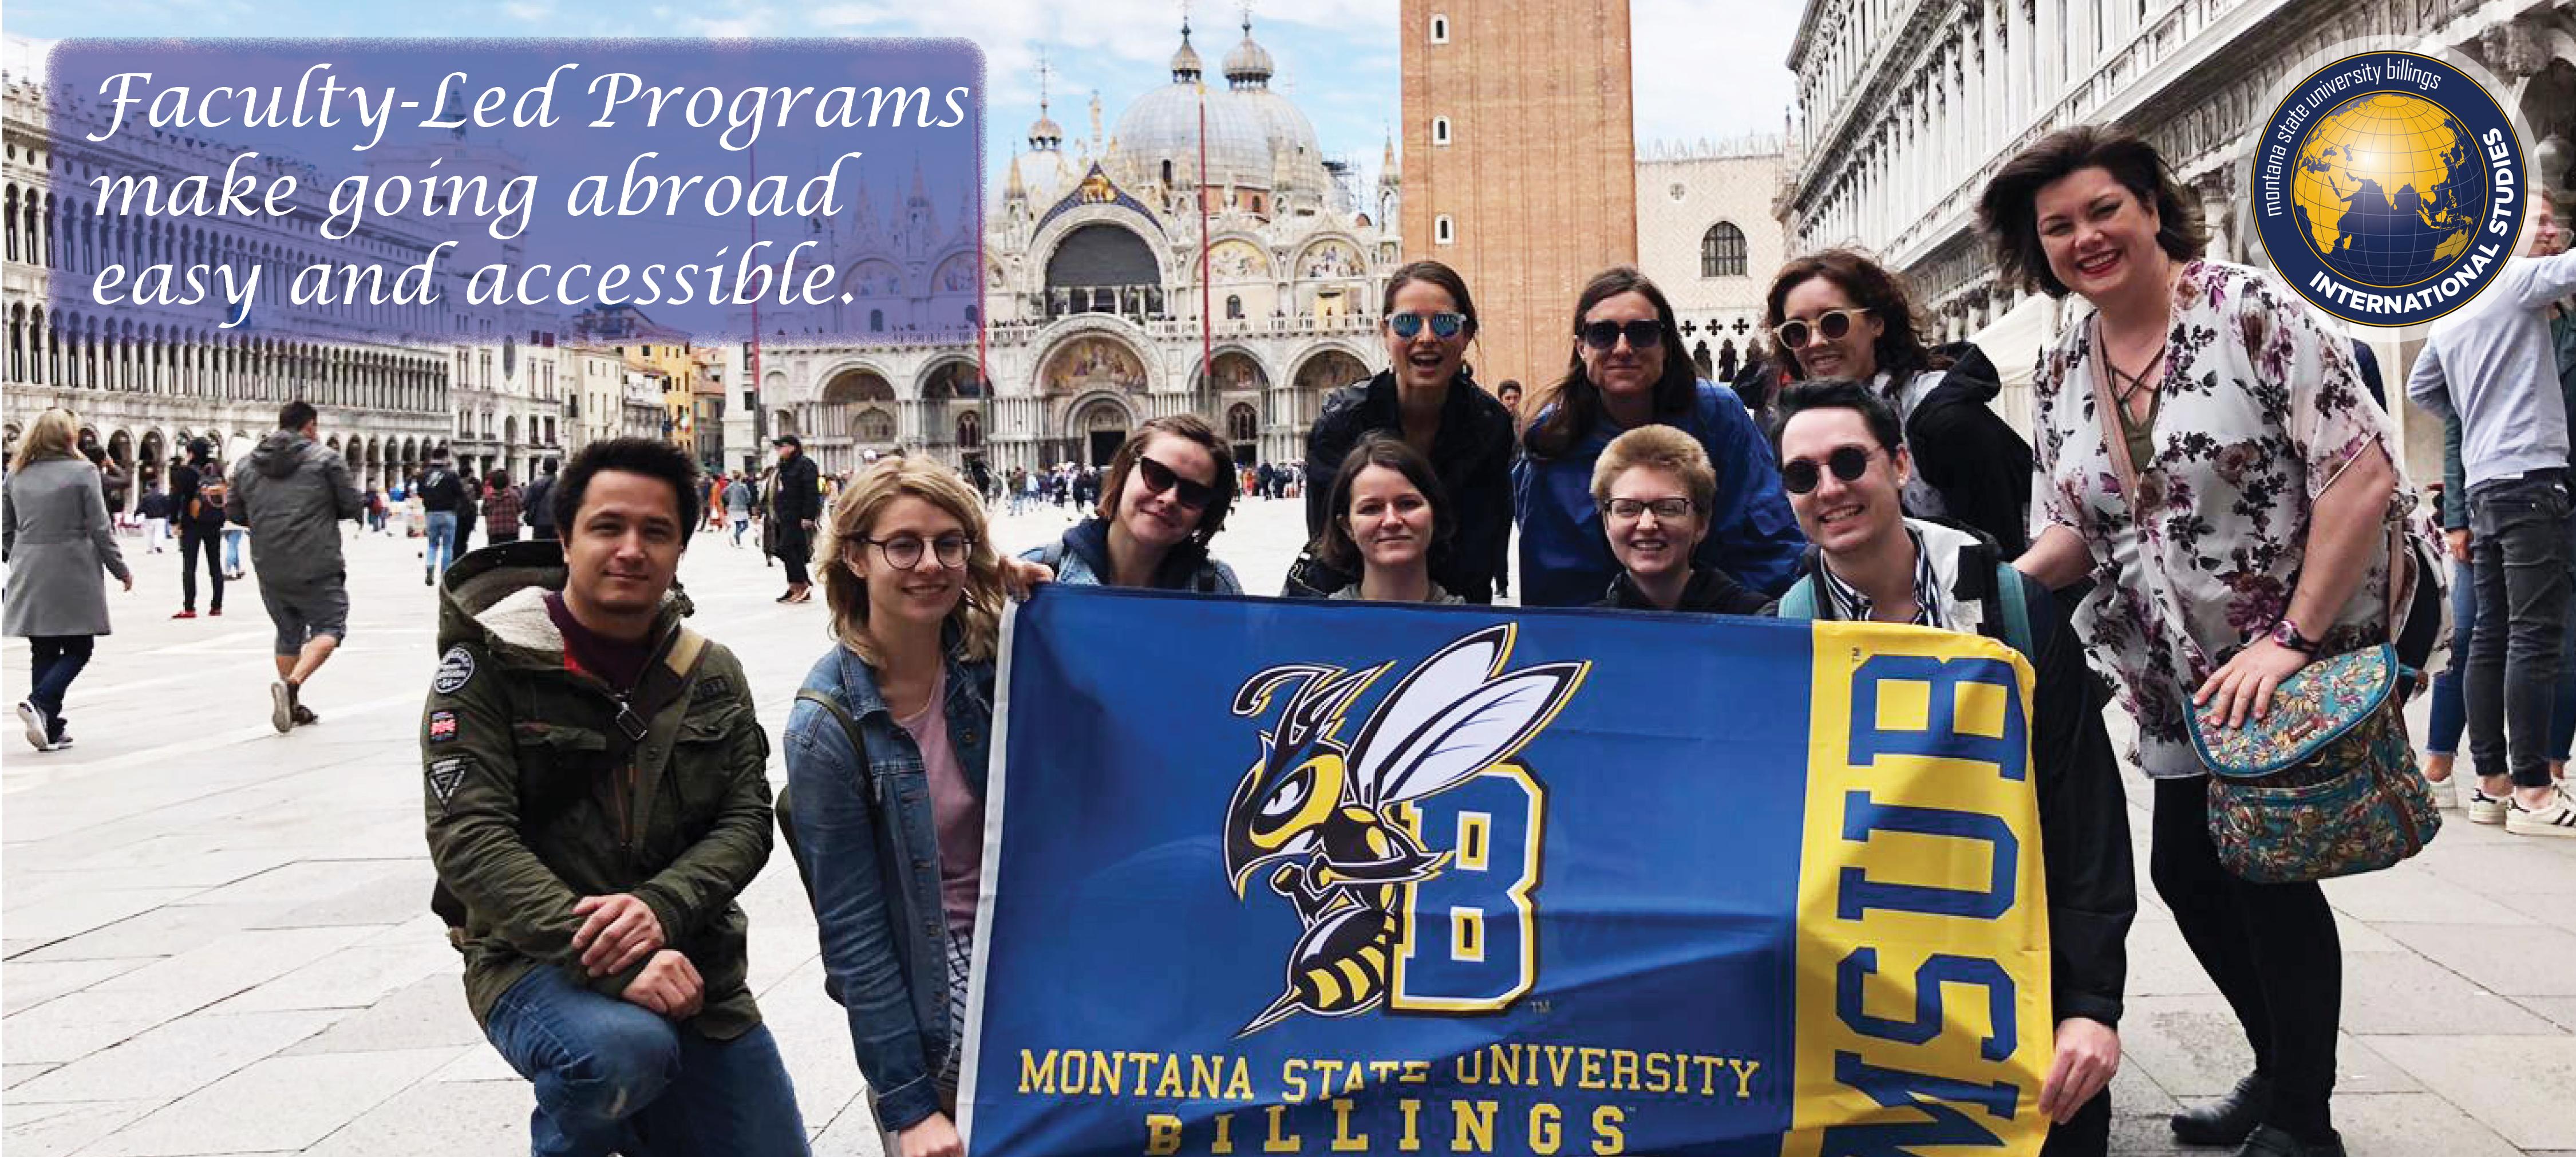 Faculty-led programs make going abroad easy and accessible. 